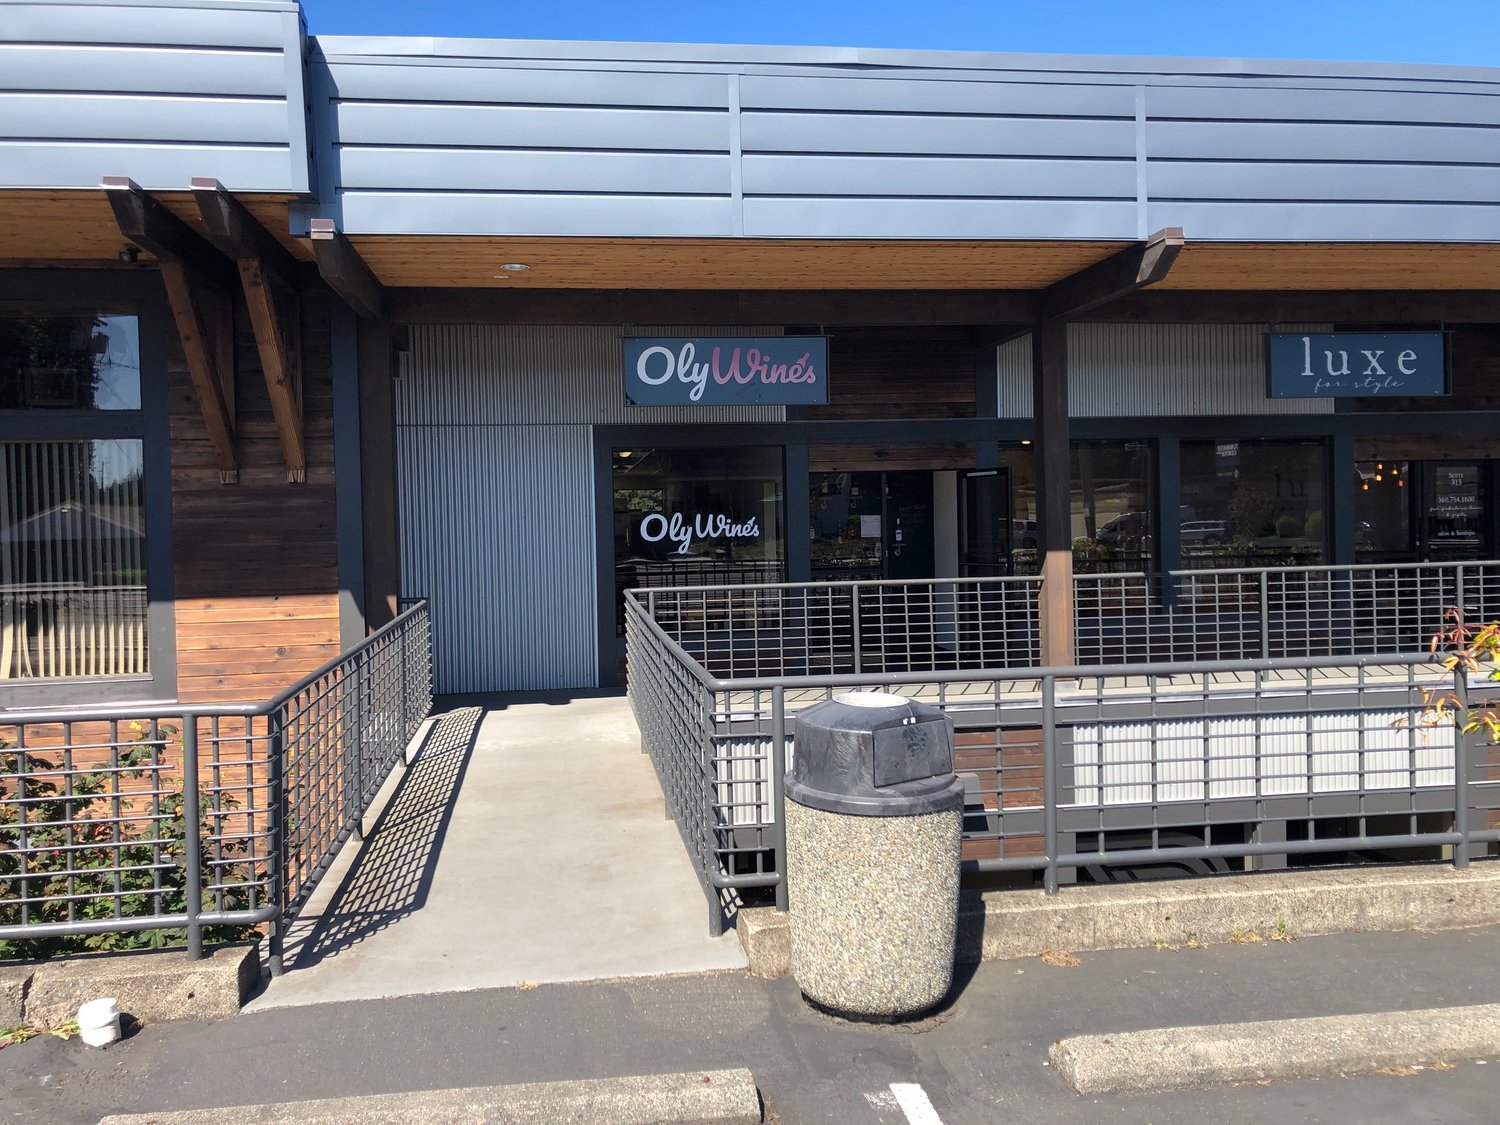 Oly Wines, located at 321 Cleveland Avenue SE, Suite 309 Tumwater, is open from Monday through Saturday from 10 a.m. to 7 p.m.